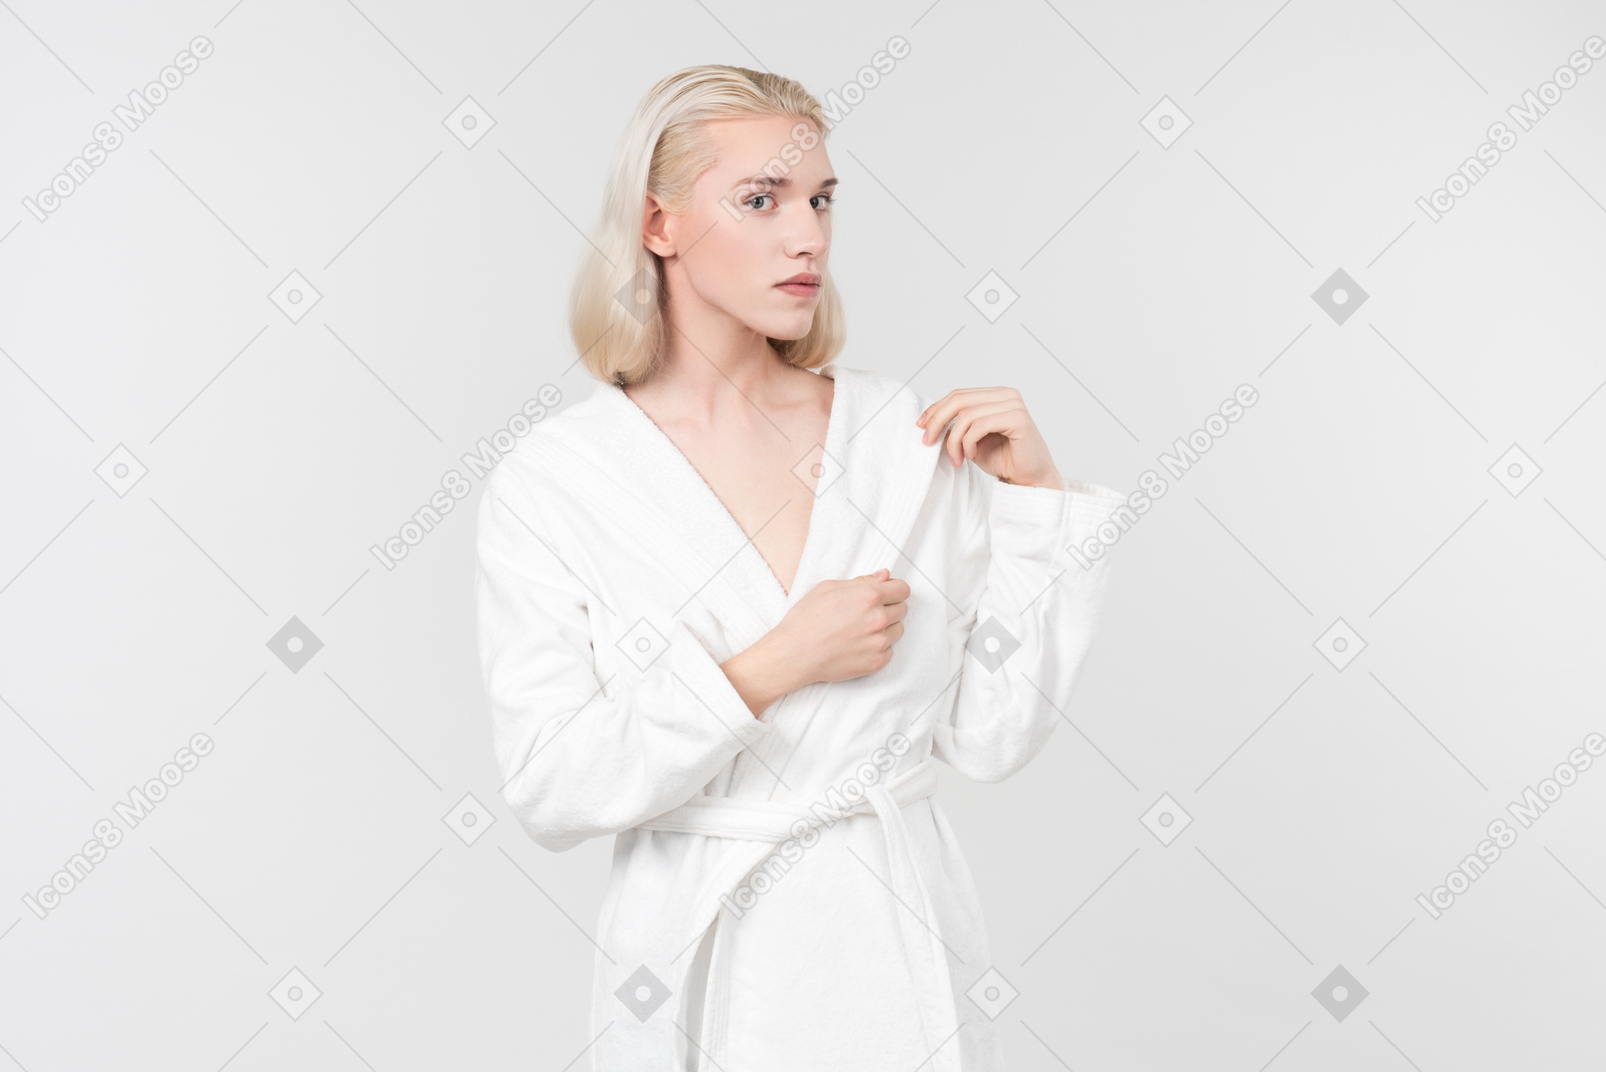 If i stained a white bathrobe but the stain is also white, should i wash it or just wait for another, not-that-white stain first?